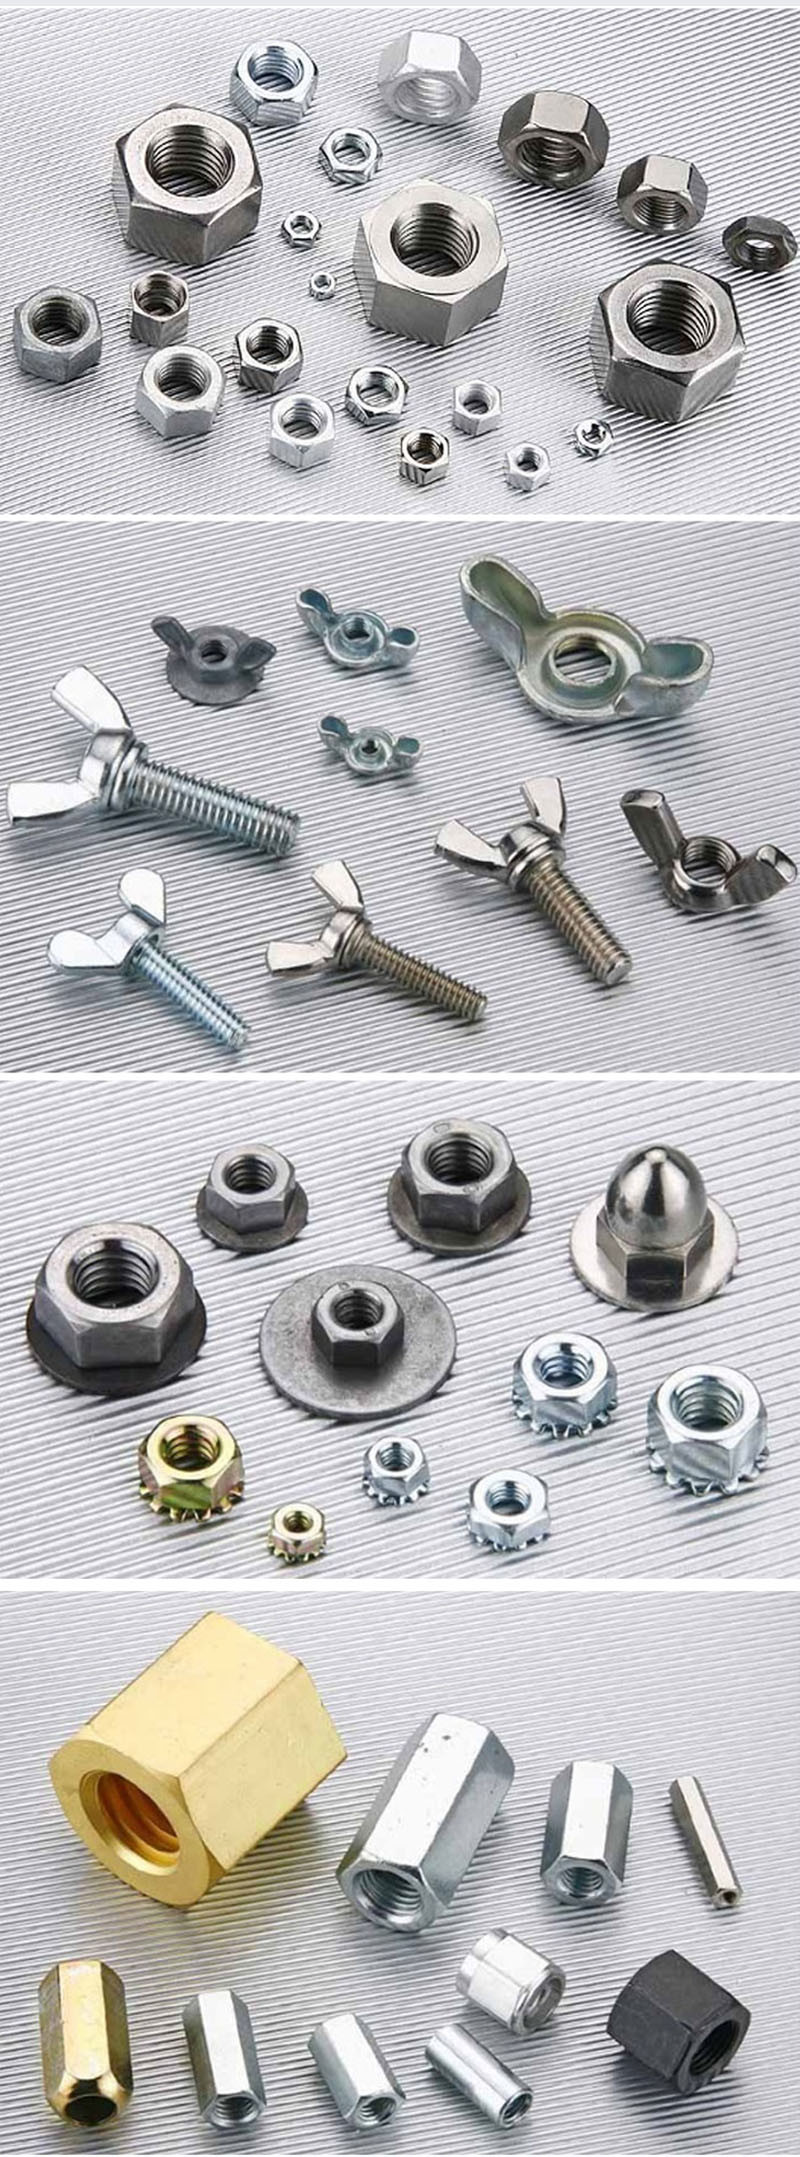 Anti-Theft Screw/Adjusting Screw/Self-Tapping Screw/Drywall Screw with High Quality